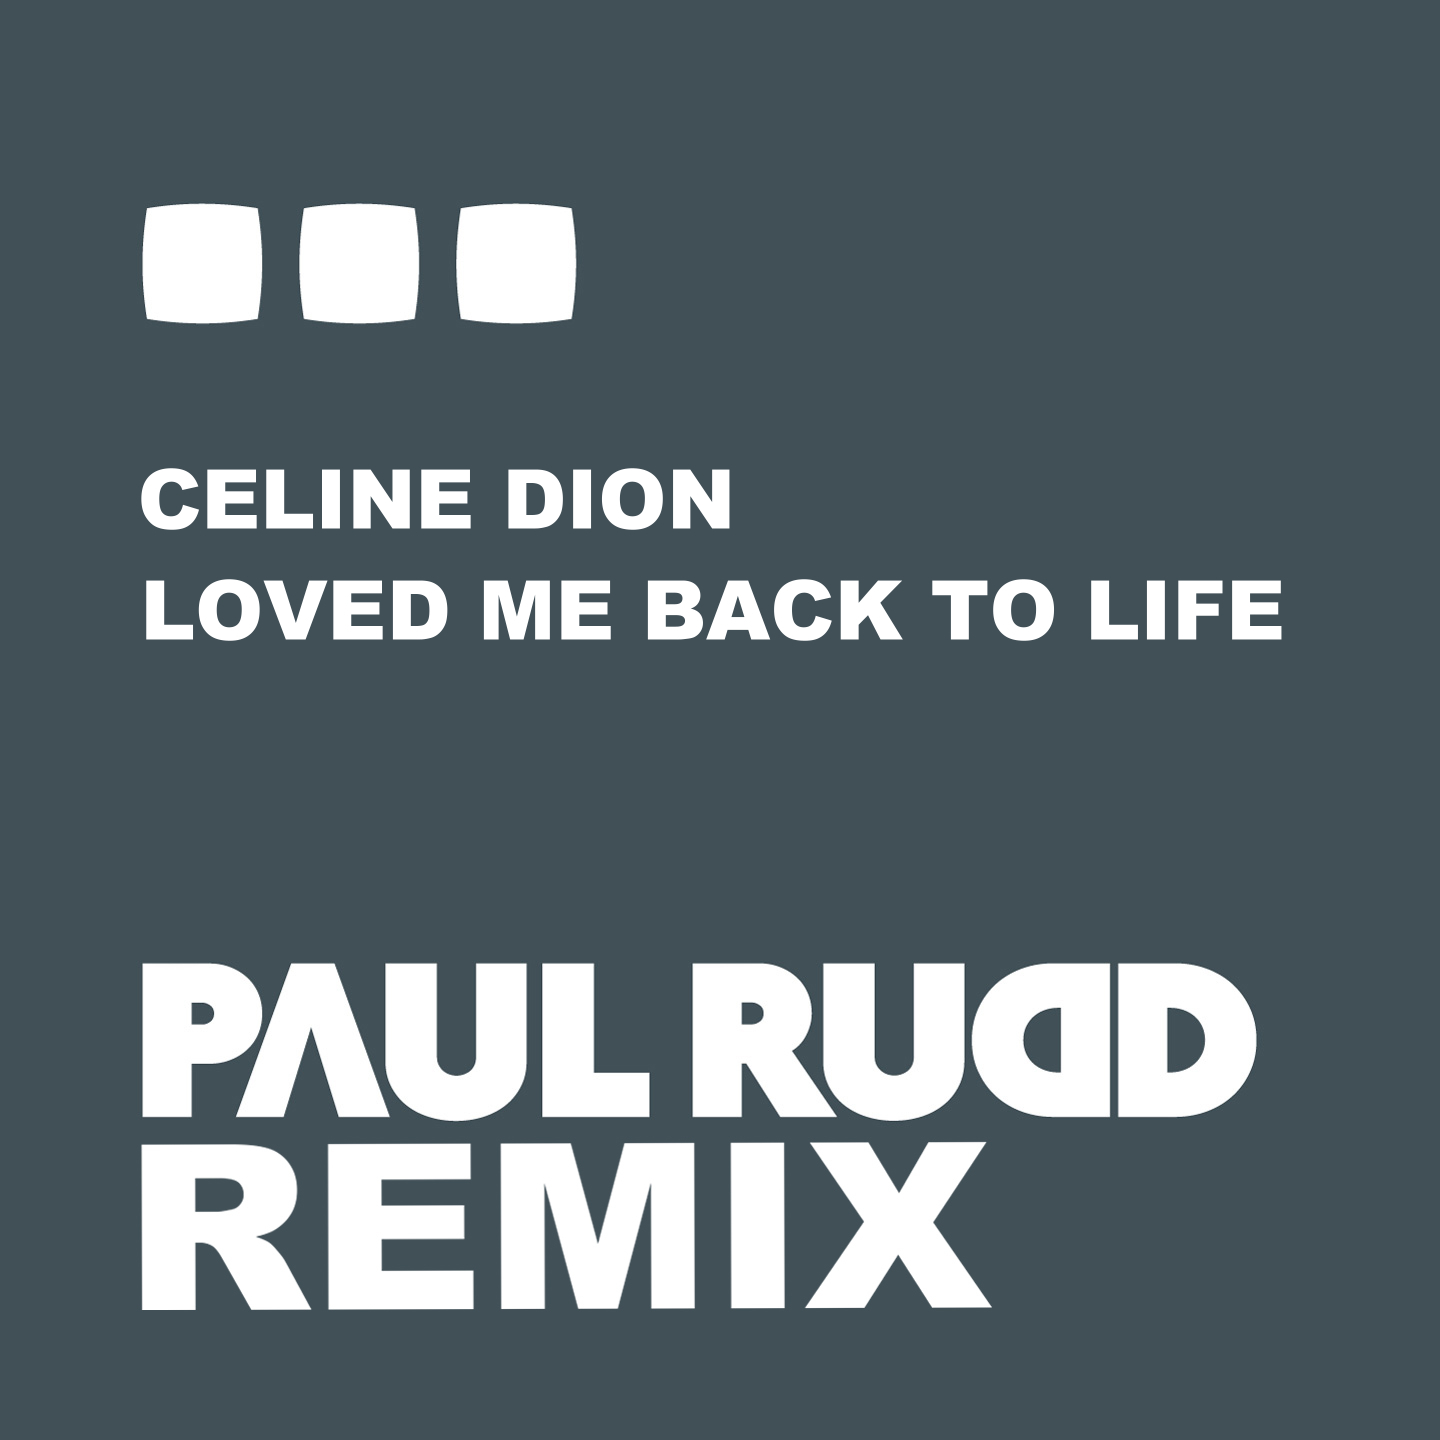 Celine Dion Loved me back to Life. Paul is Life. Back to me. Love me back to Life Natalie перевод. Coming back to life